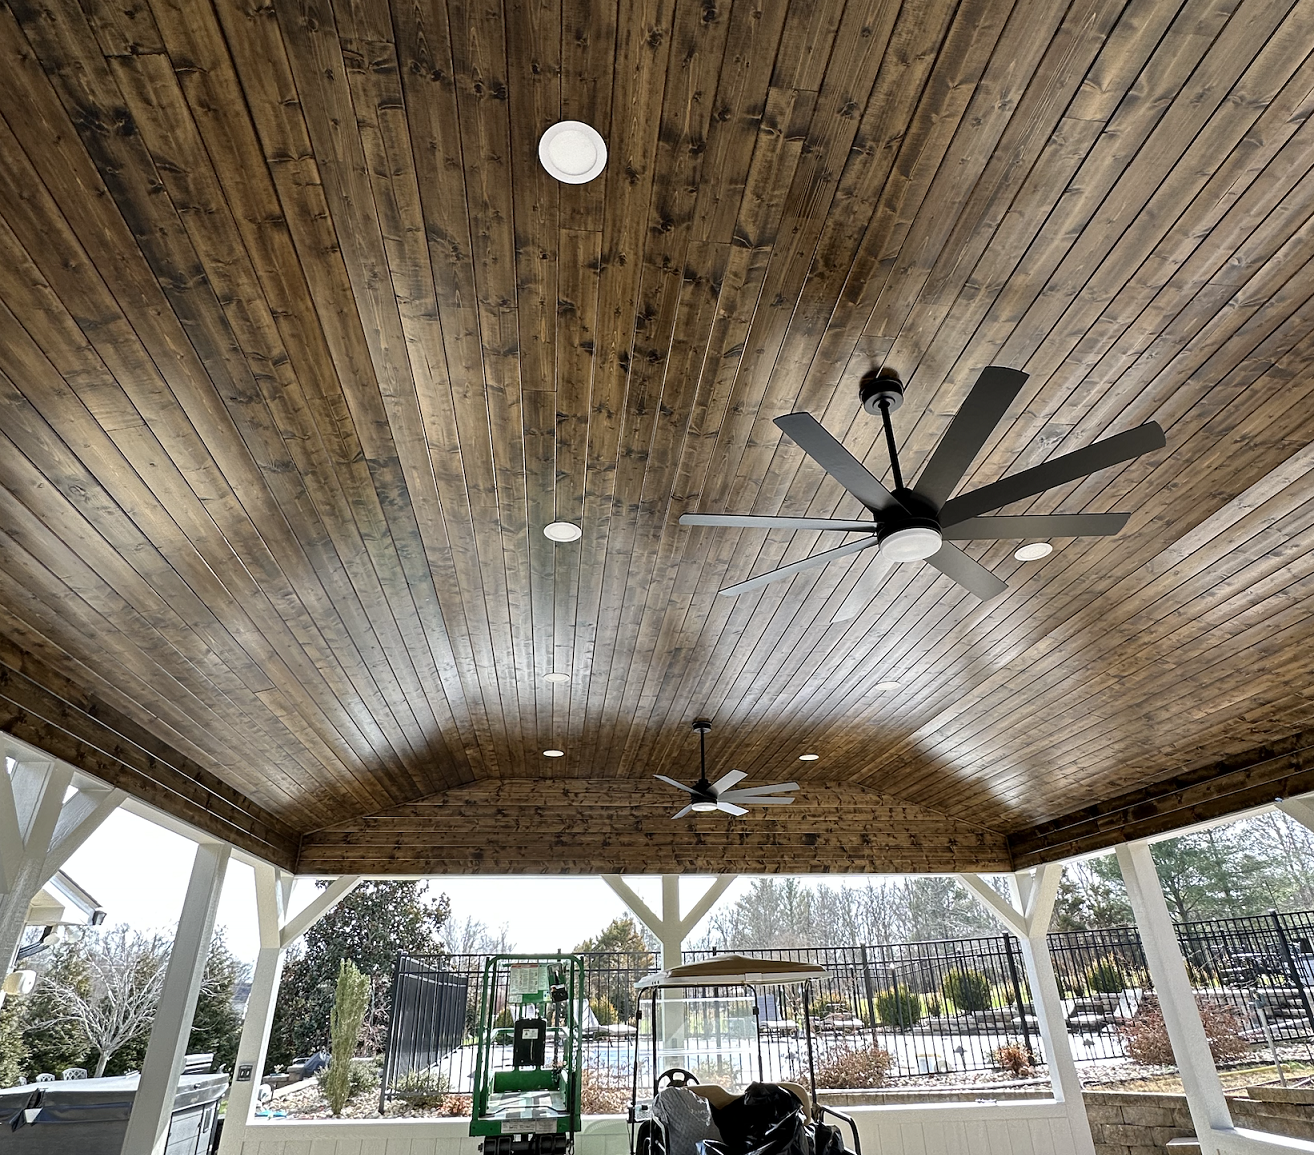 Wood Staining For Car-Port Ceiling After